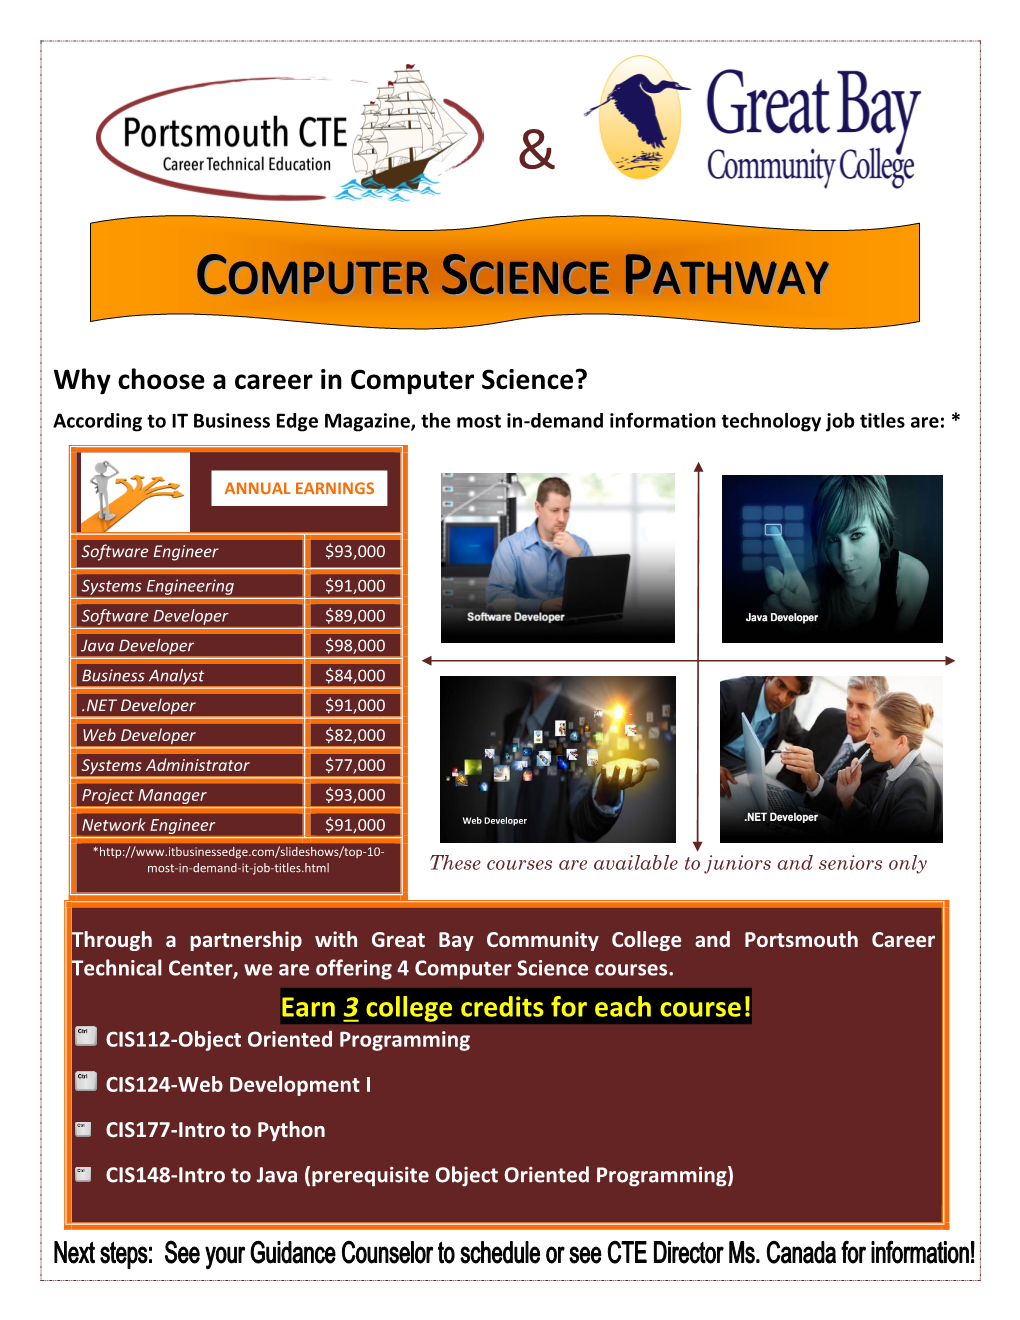 To Download the Computer Science Pathway Brochure